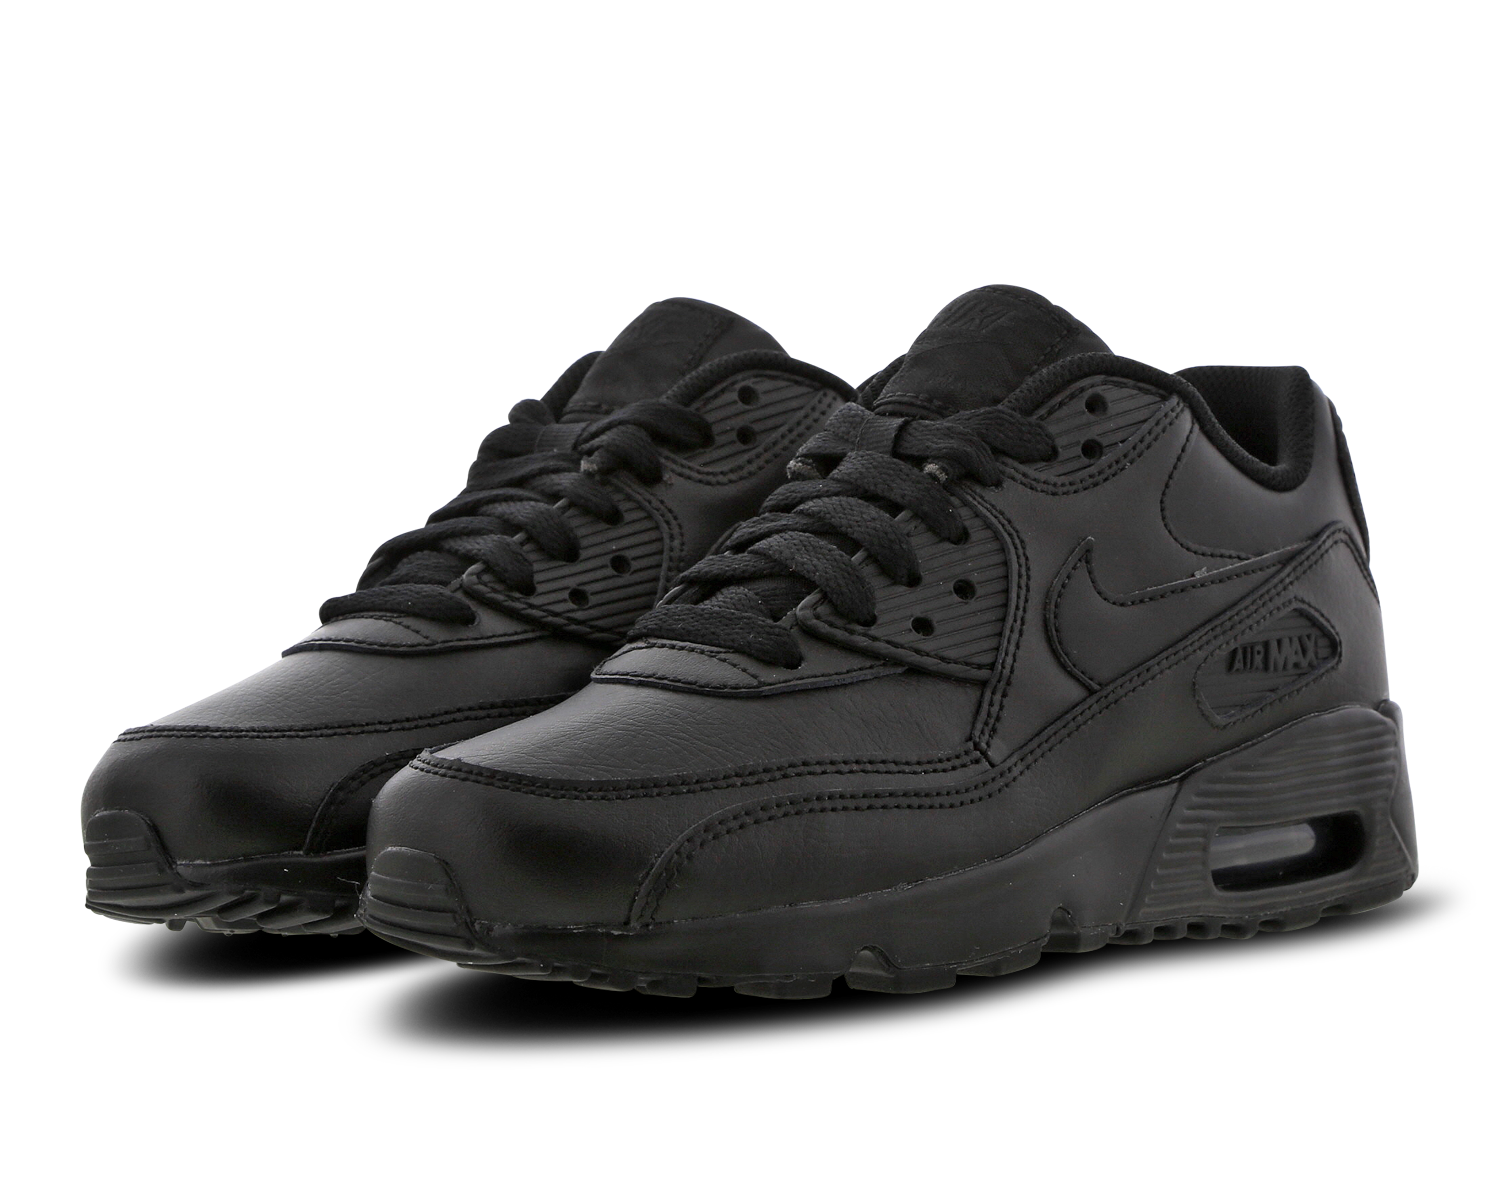 nike air max 90 black leather mens trainers